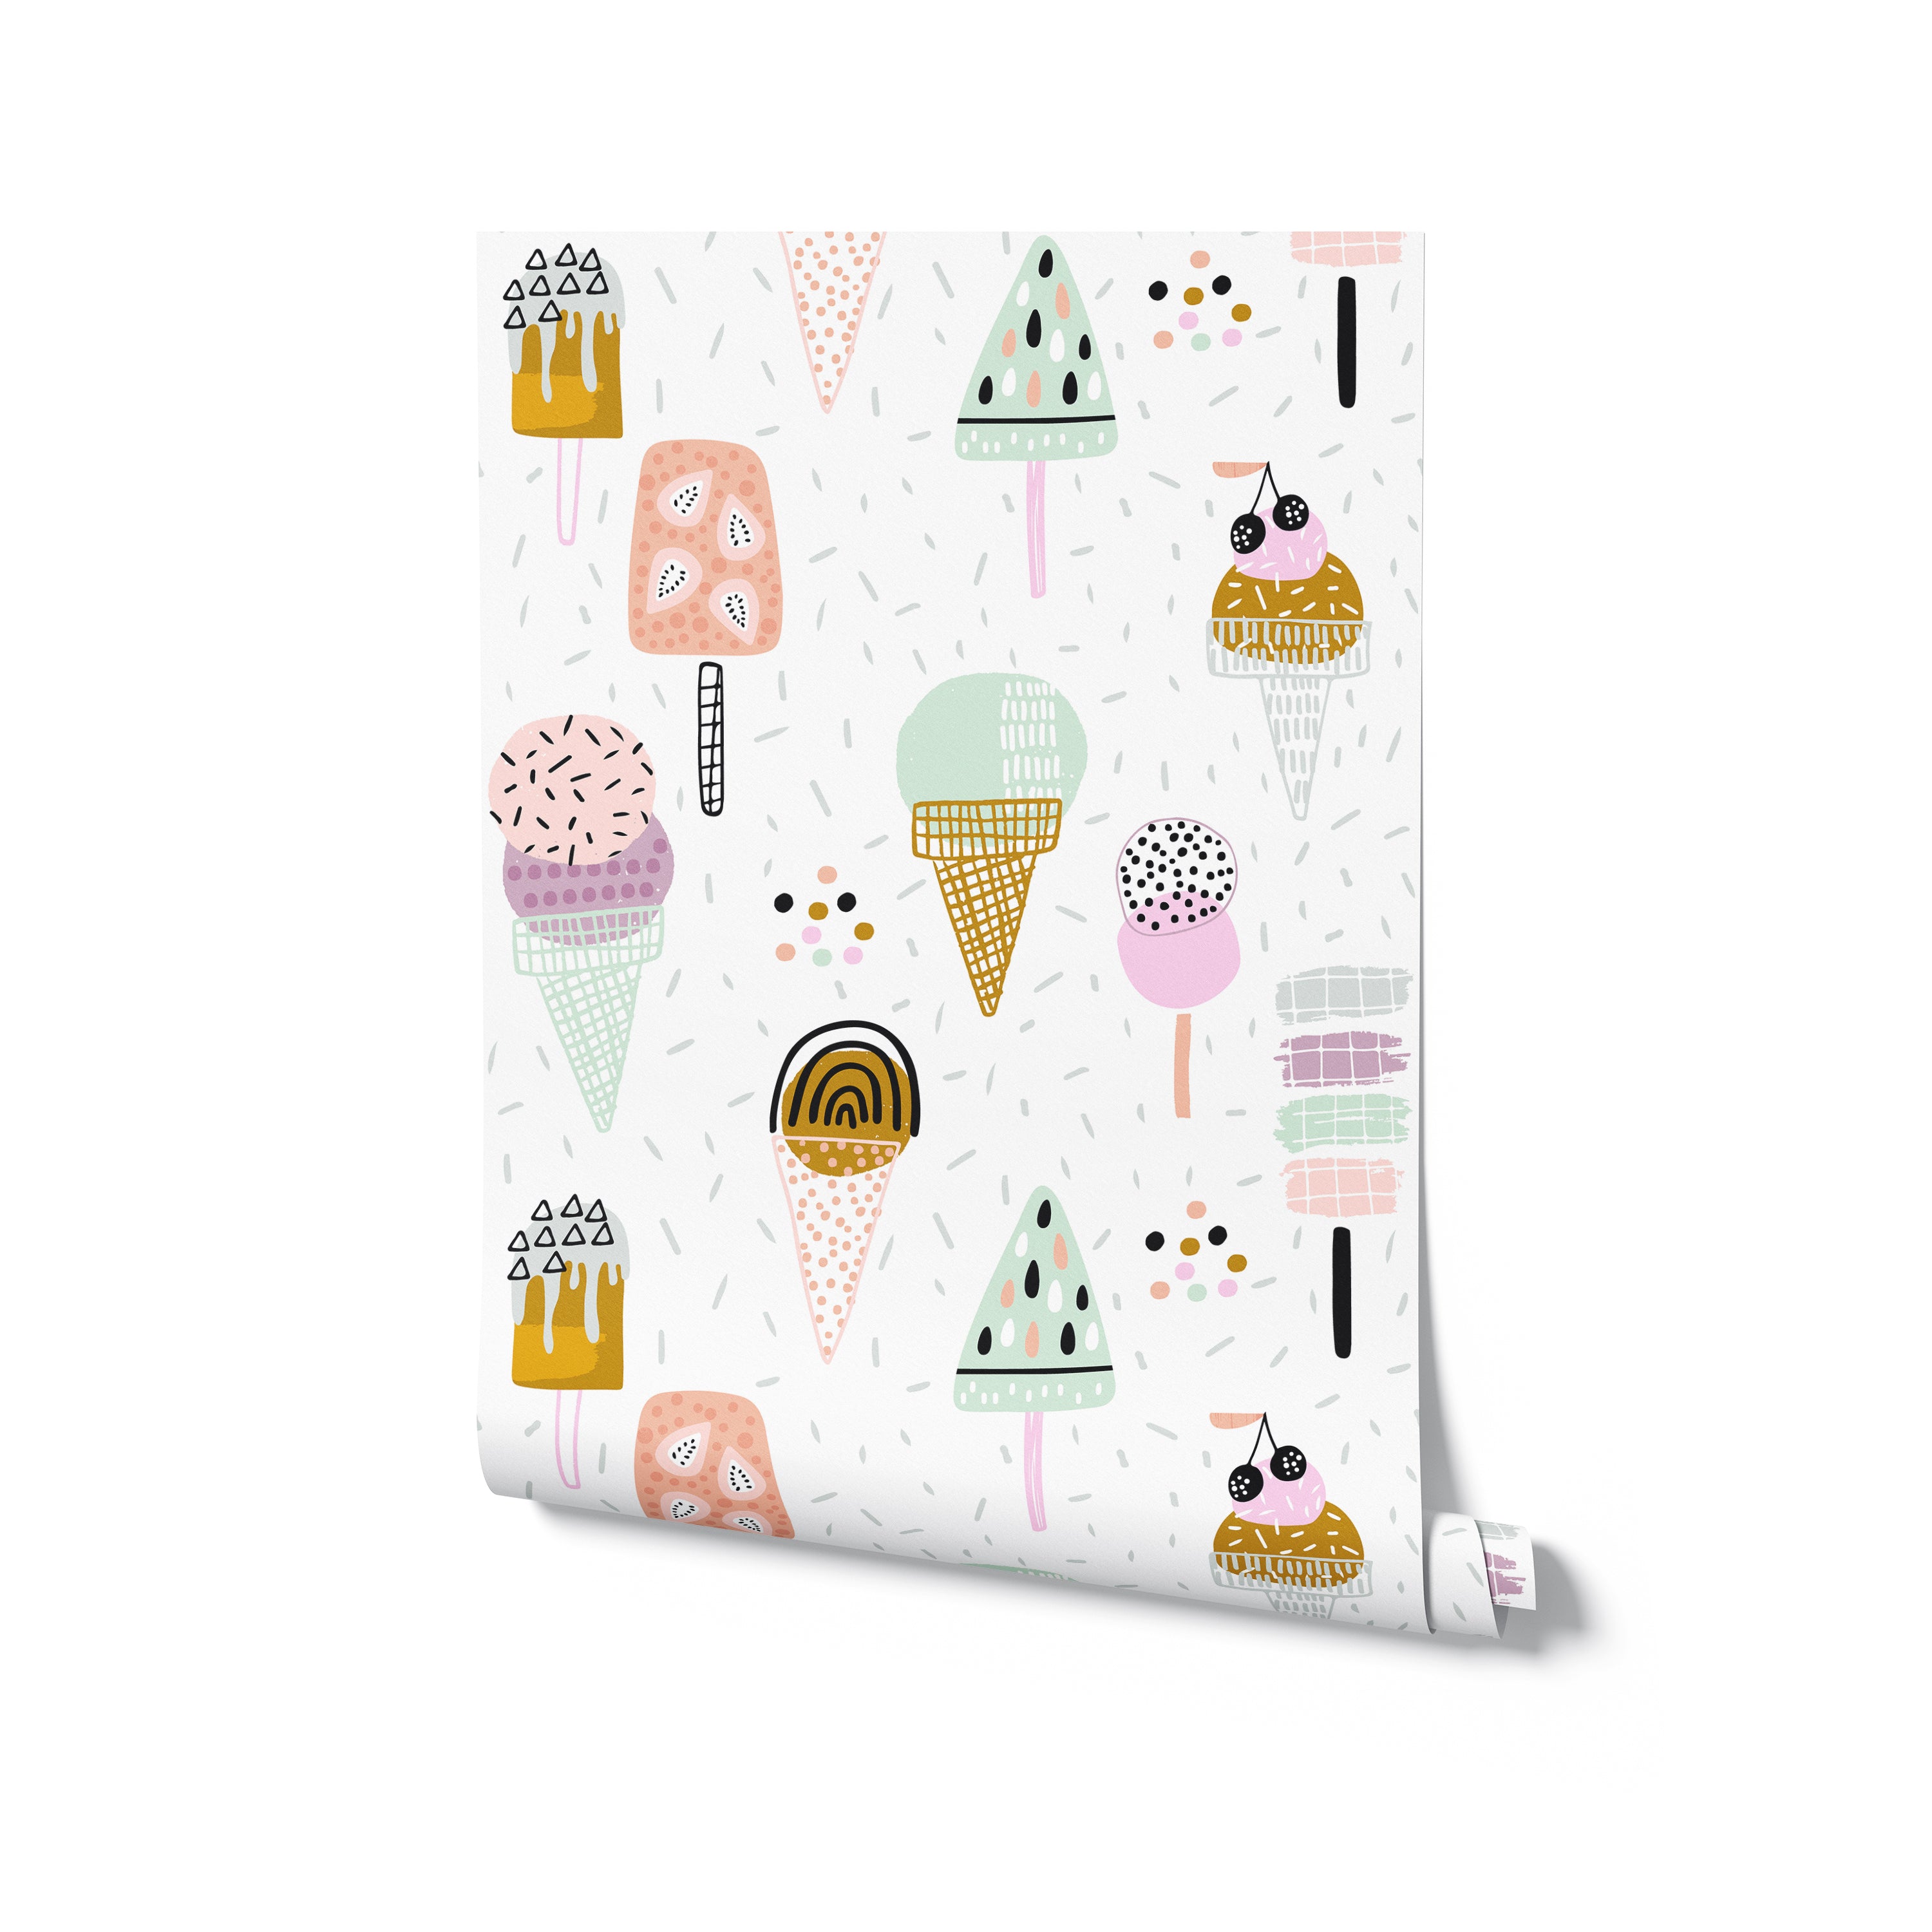 Roll of children’s wallpaper displaying a cheerful and colorful array of ice cream illustrations, including cones and popsicles in pastel hues, set on a light, dotted background, perfect for a nursery or playroom